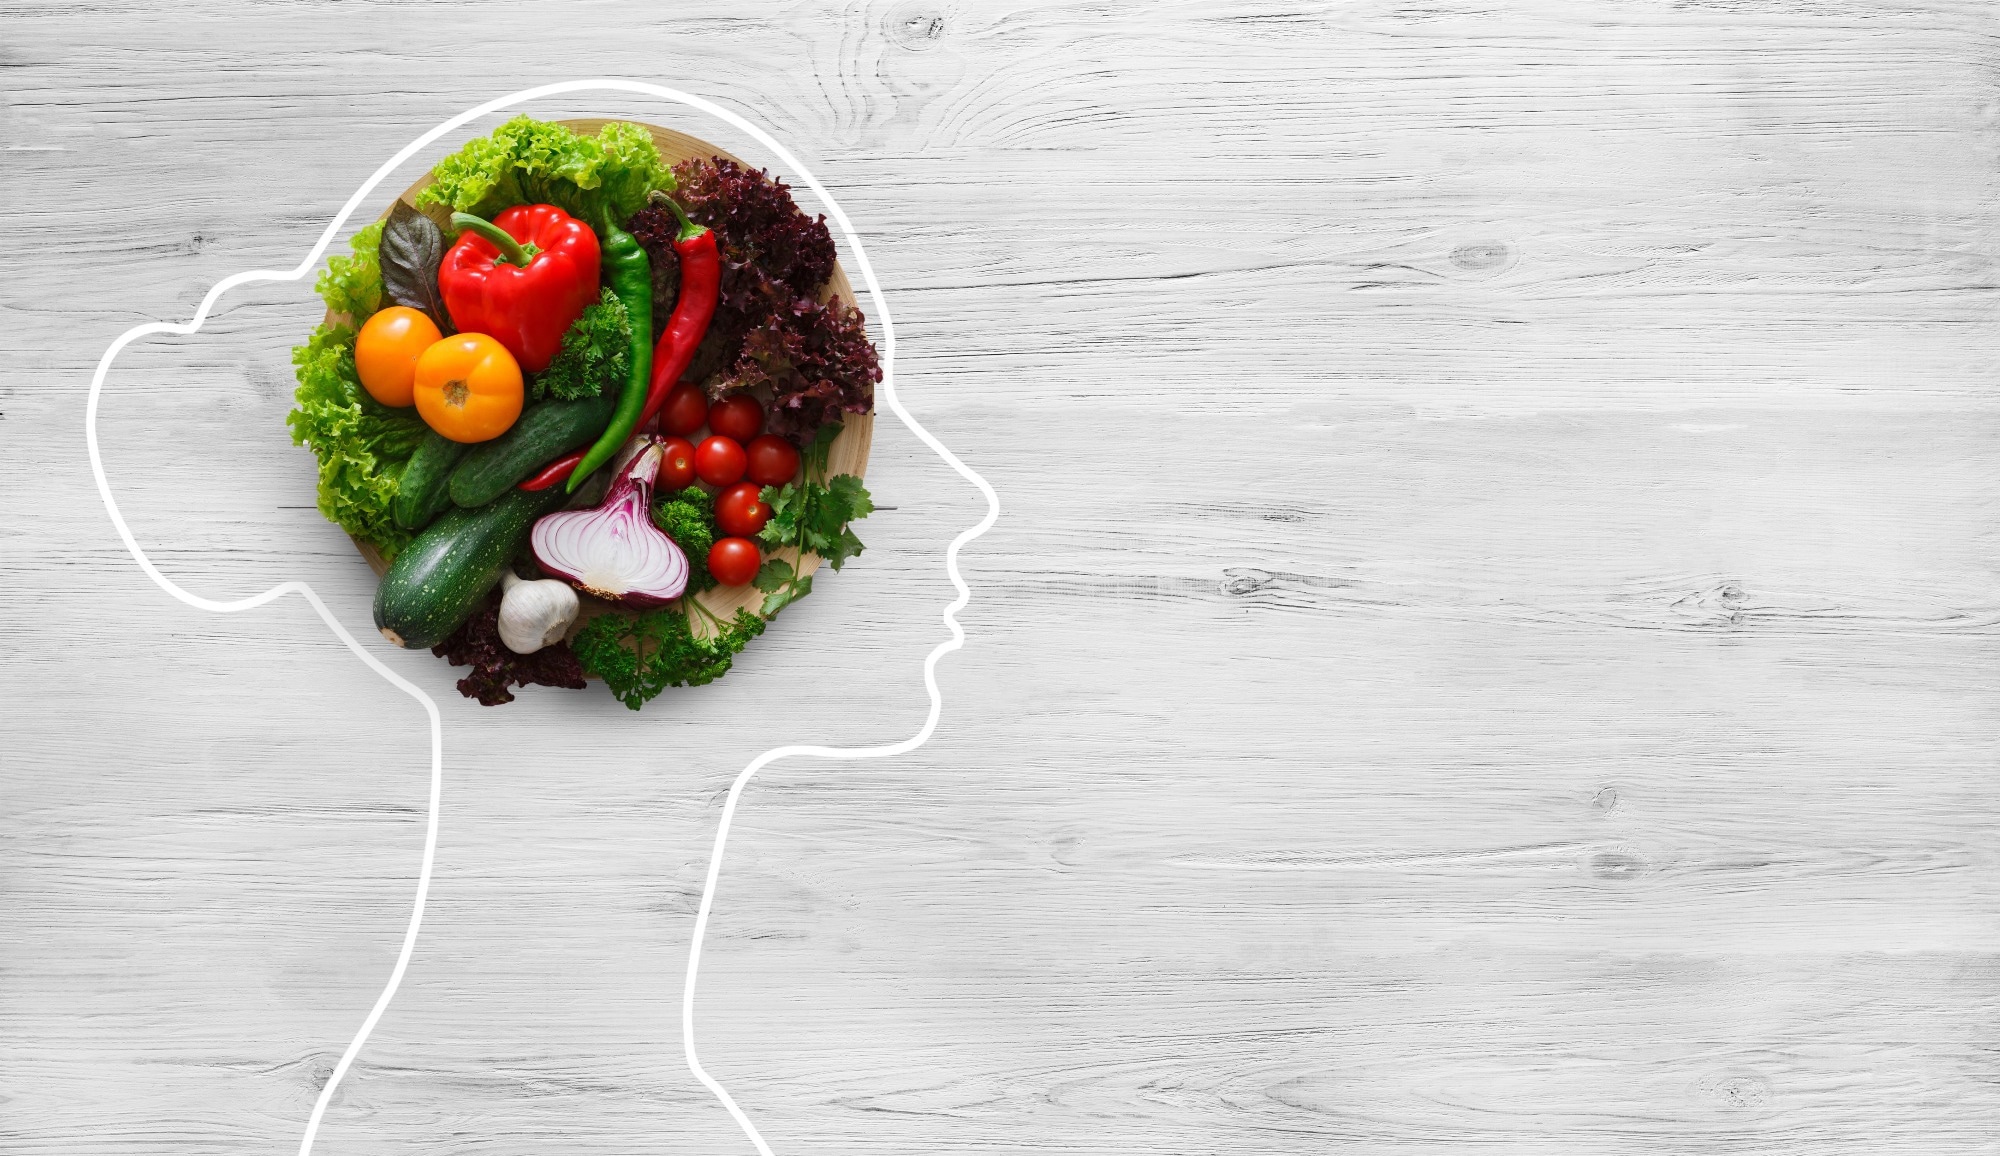 Food & You: A Digital Cohort on Personalized Nutrition